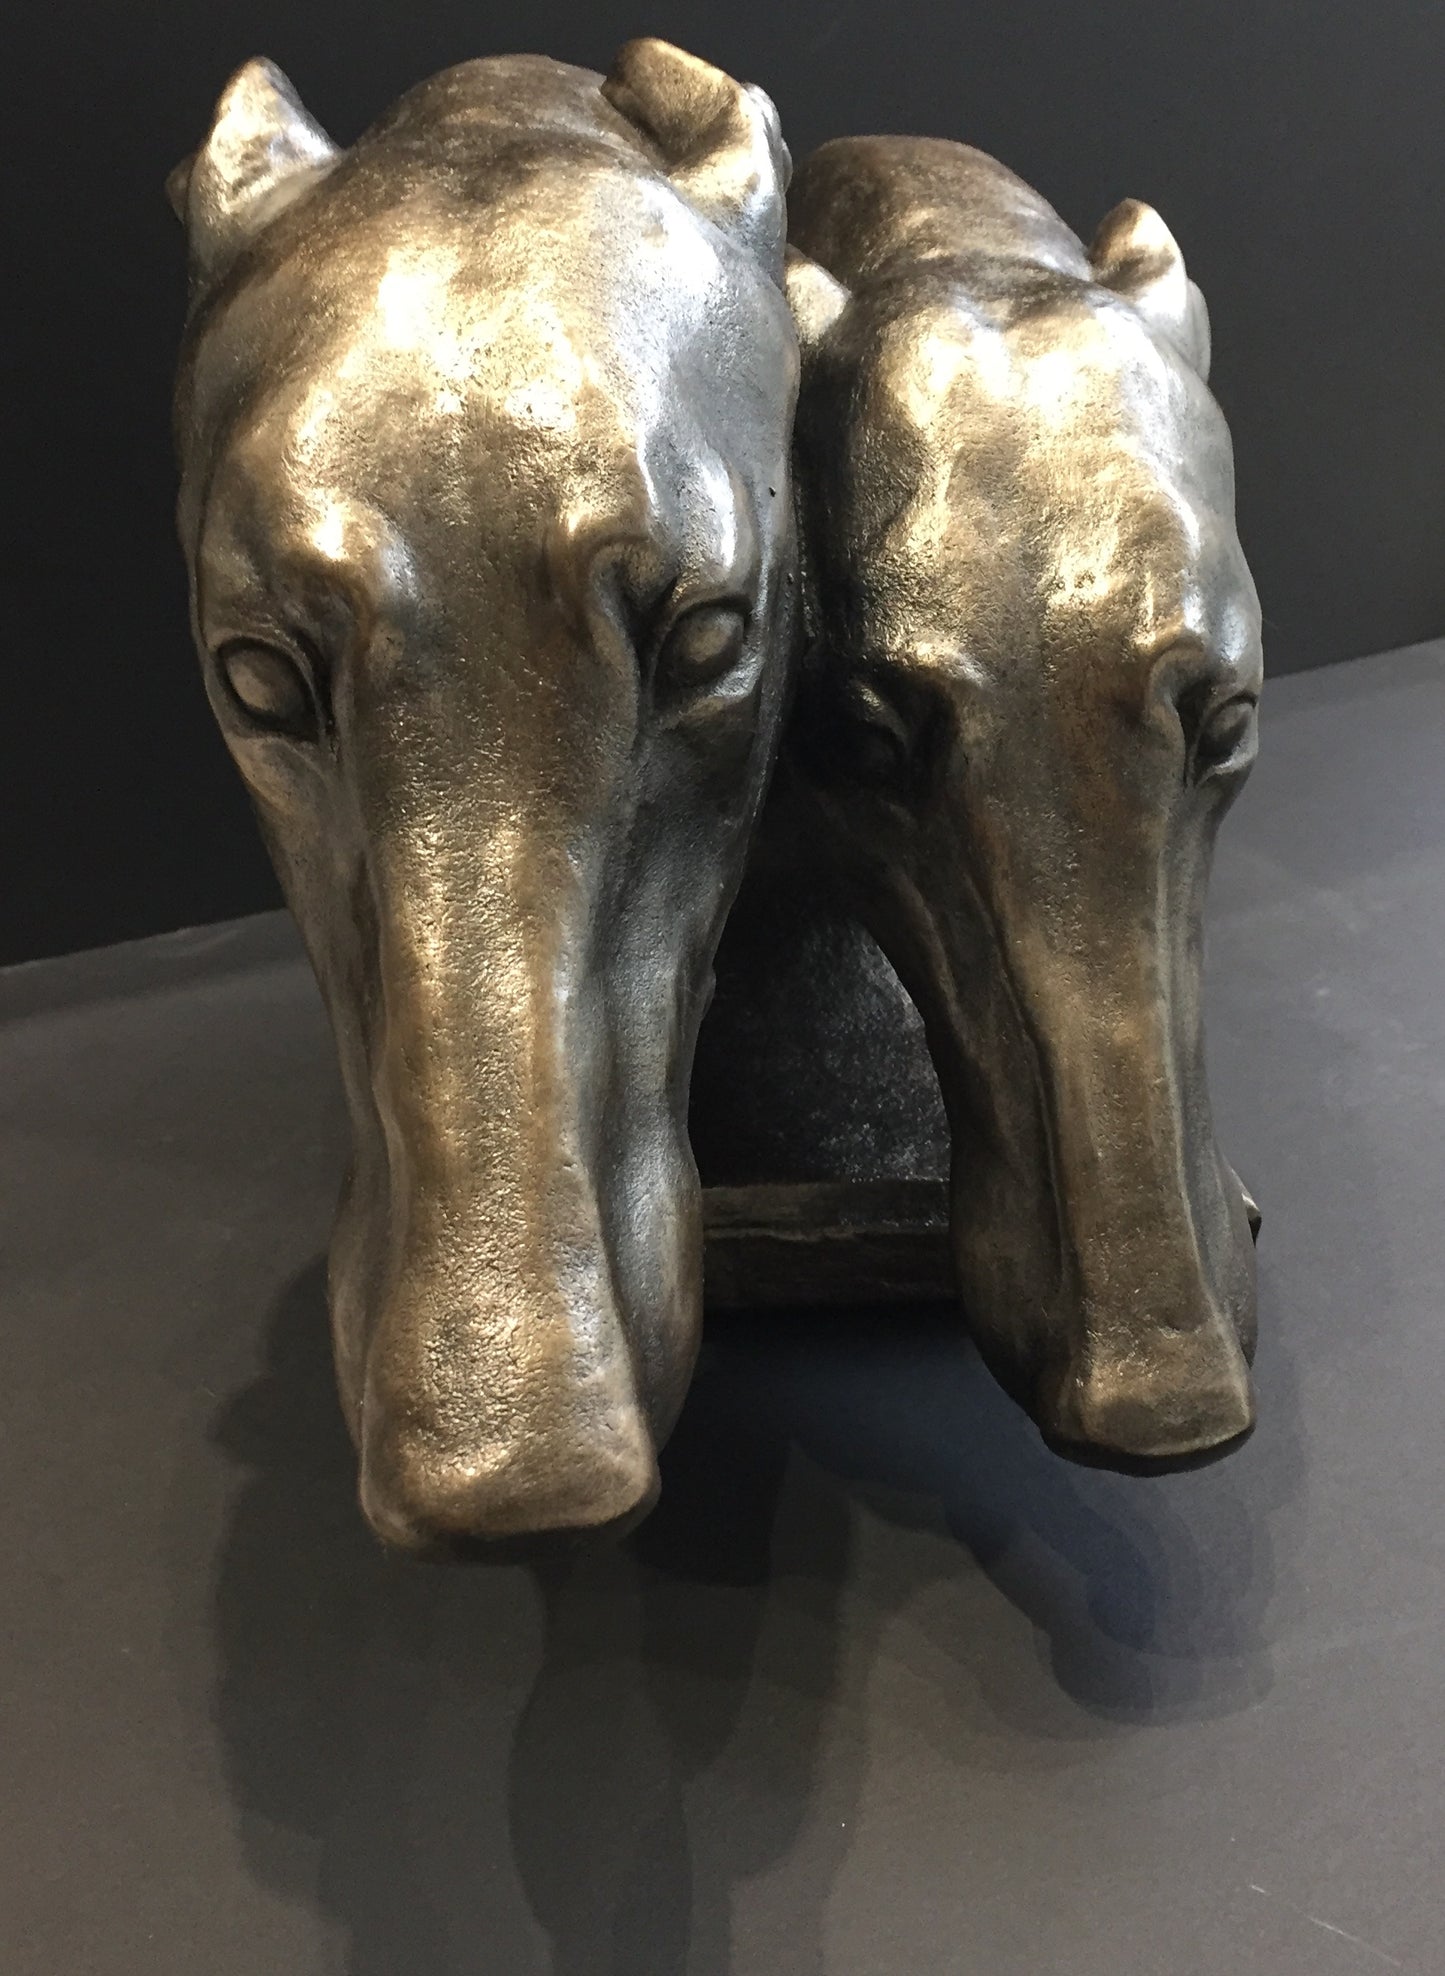 Fabulous new cold cast bronze from Annette Rydin